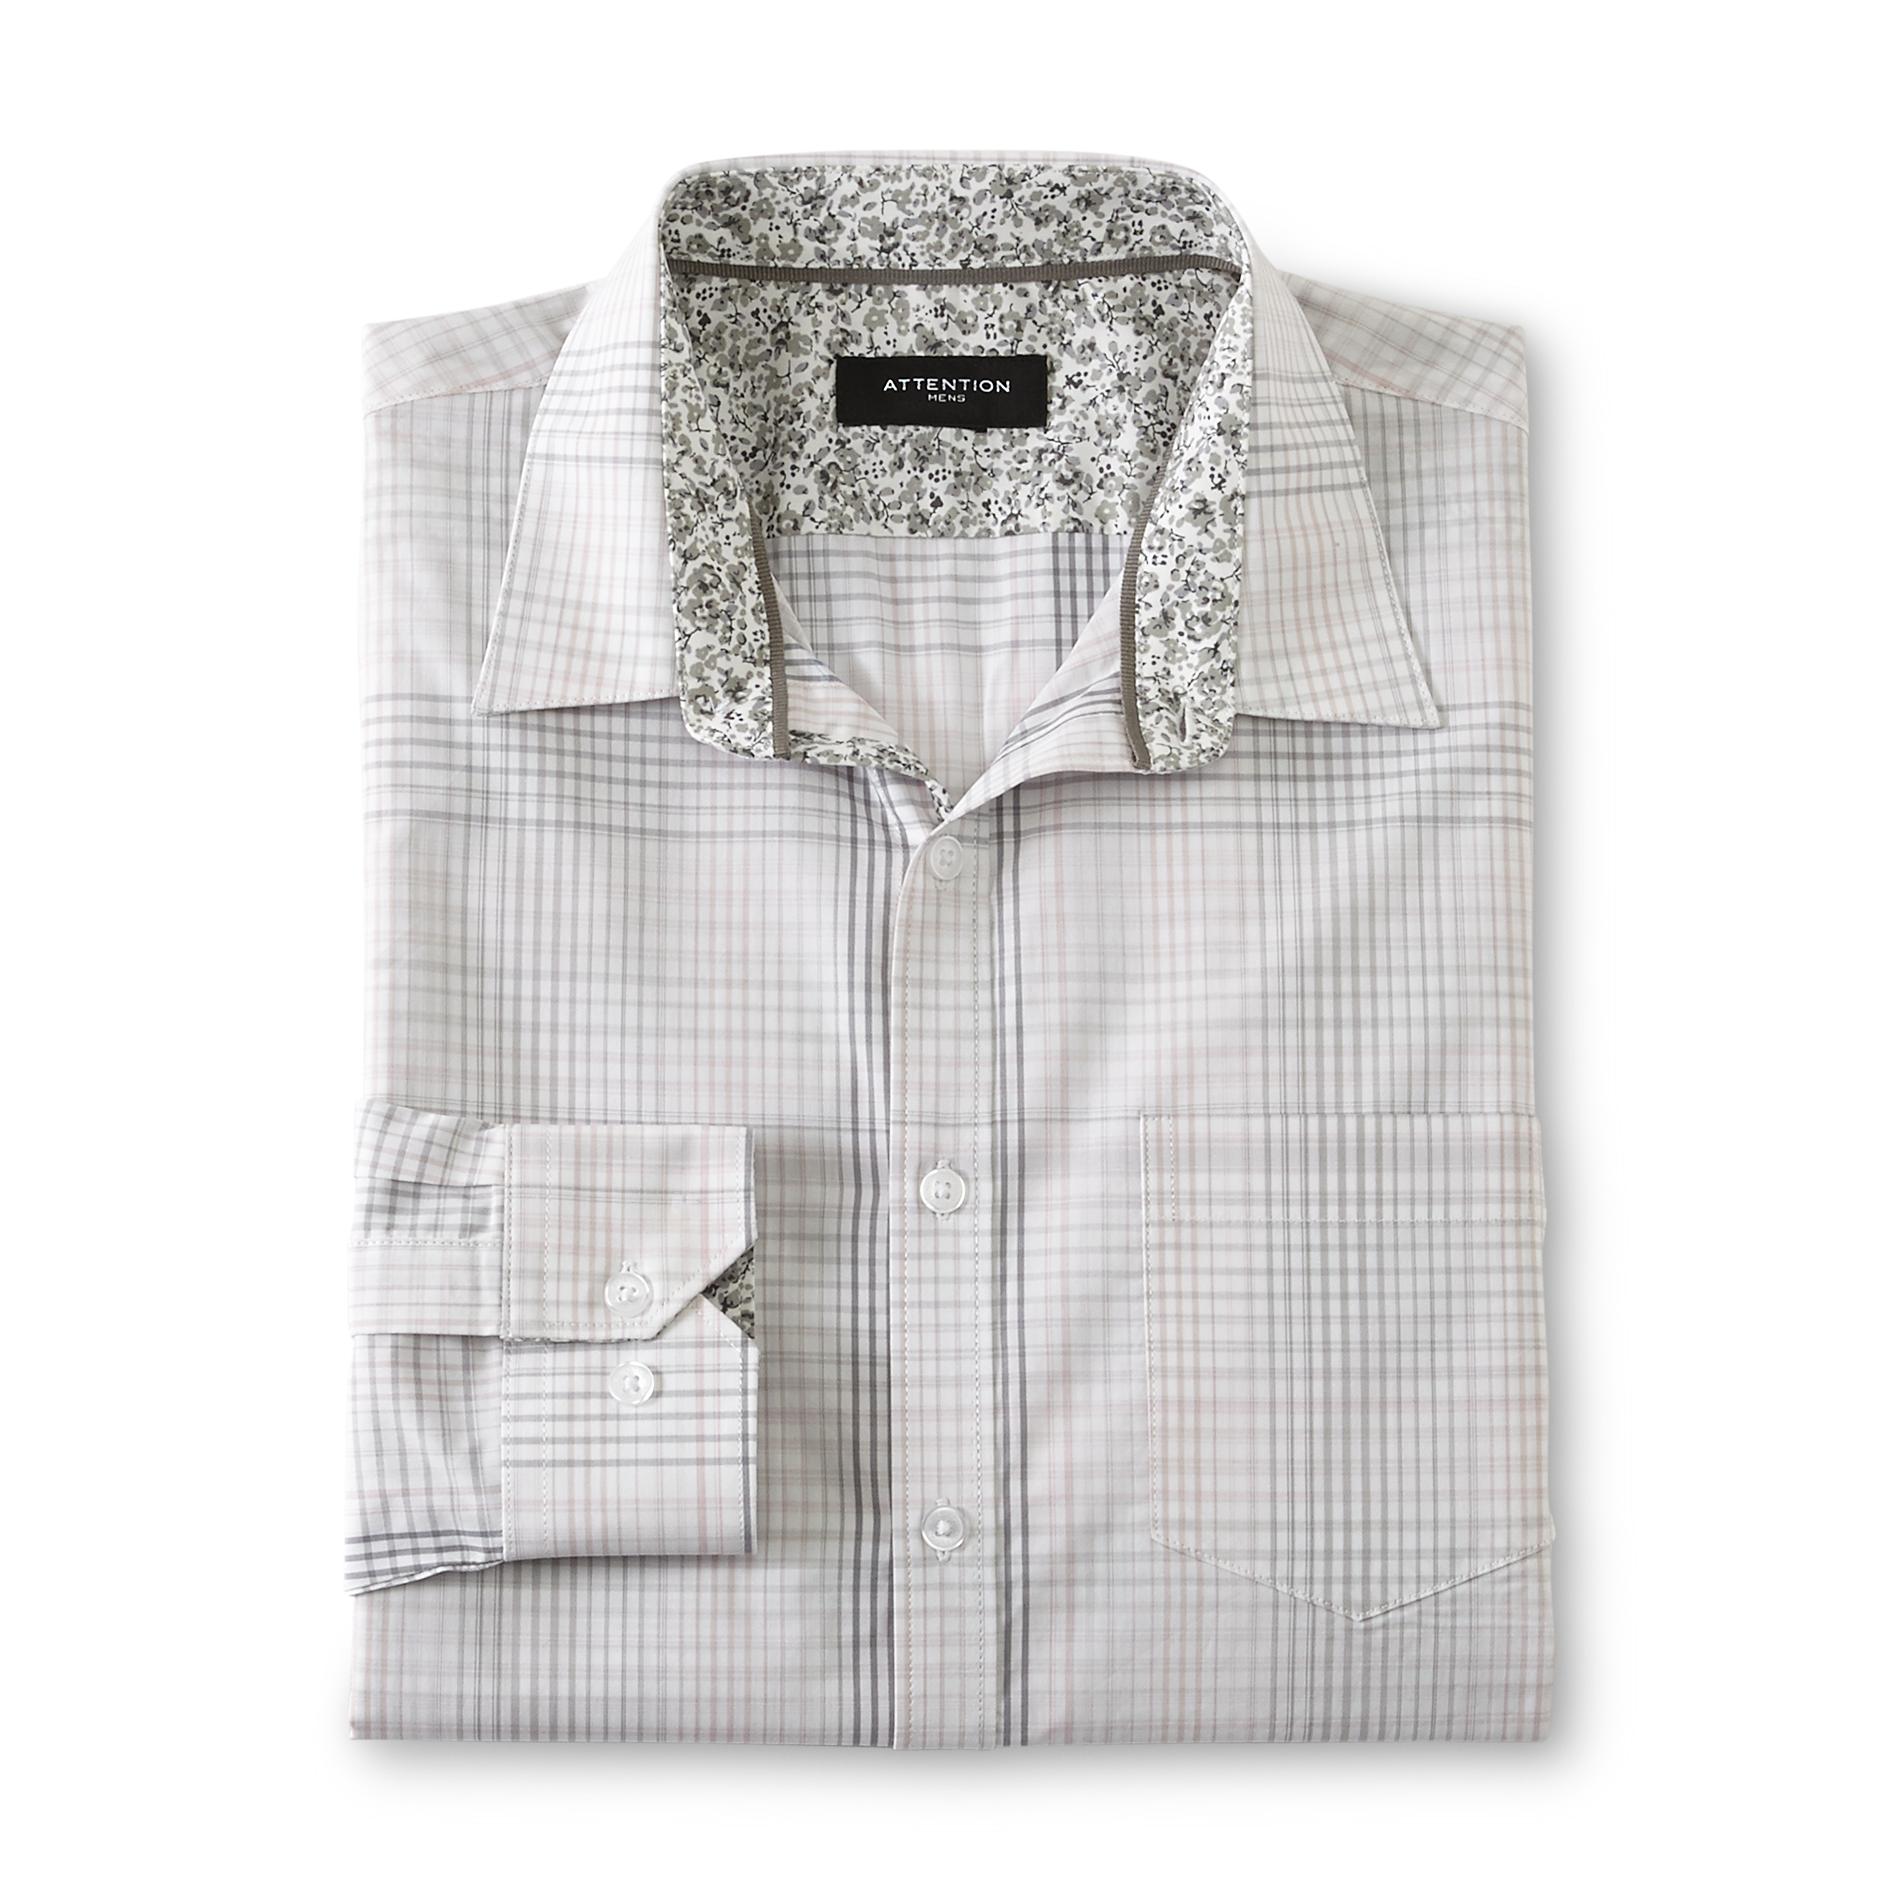 Attention Men's Casual Shirt - Plaid and Floral Print